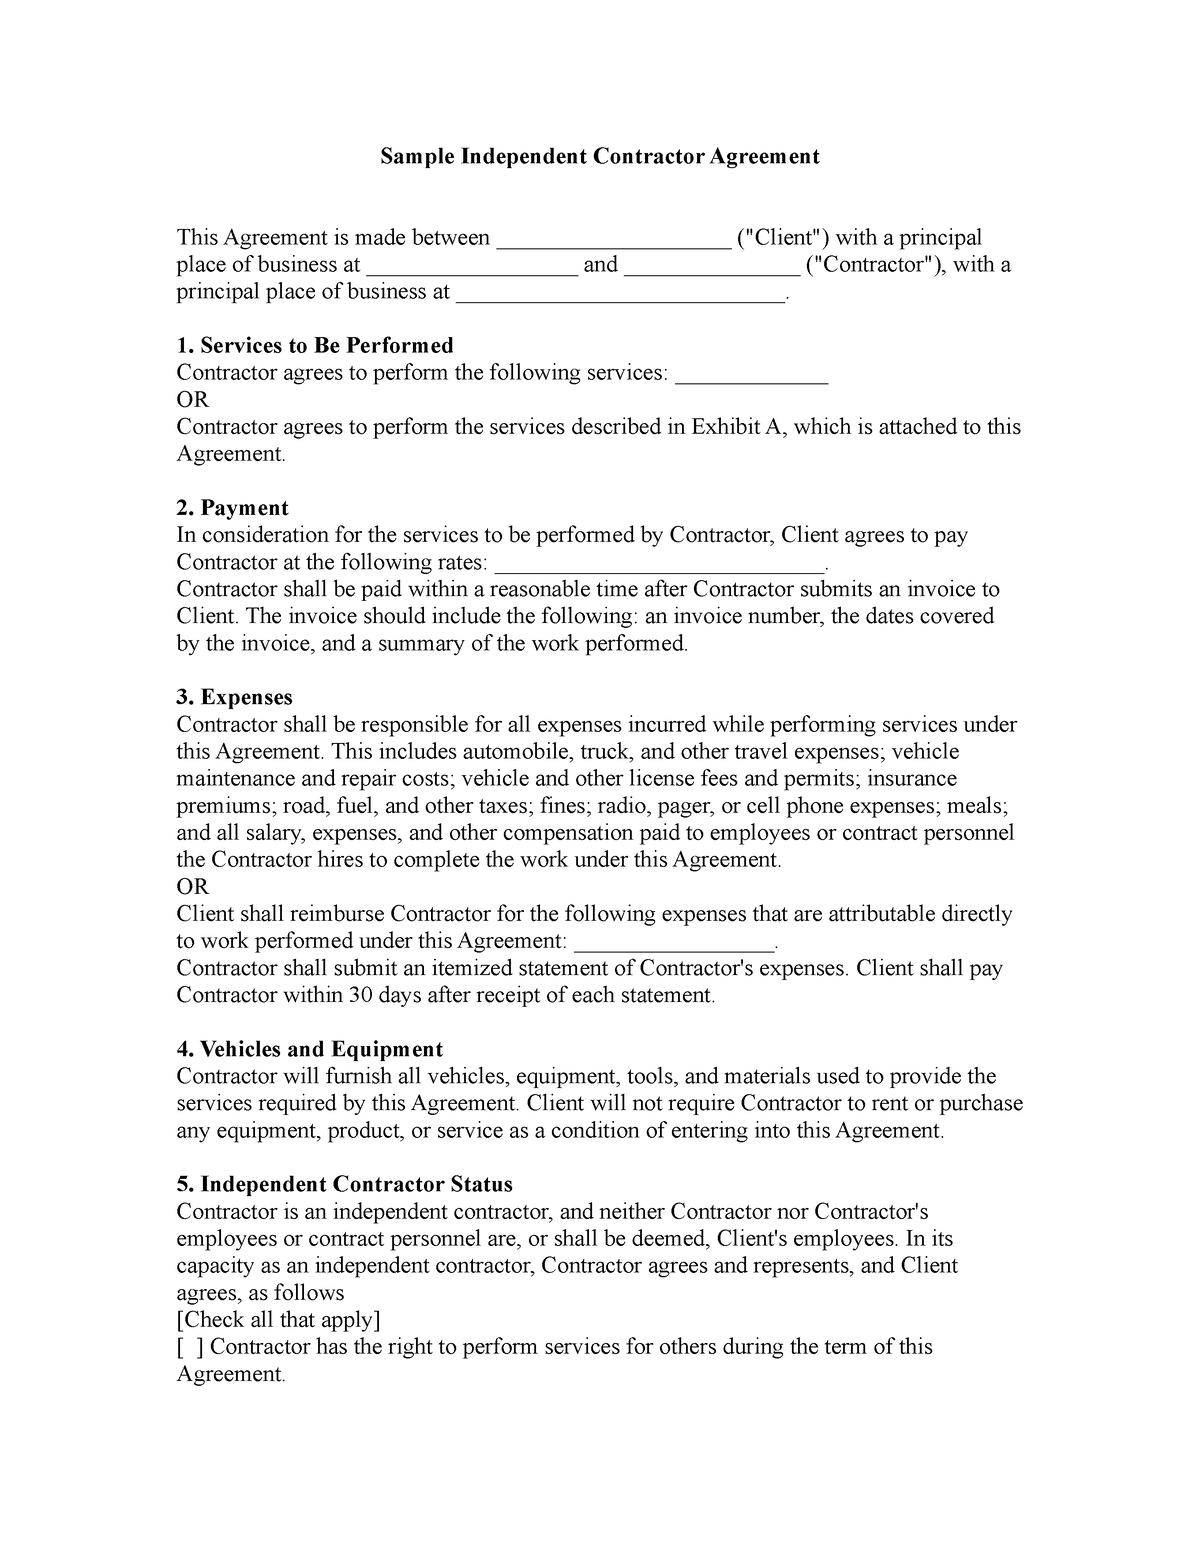 Sample Independent Contractor Agreement Final Fall2014 Sample 